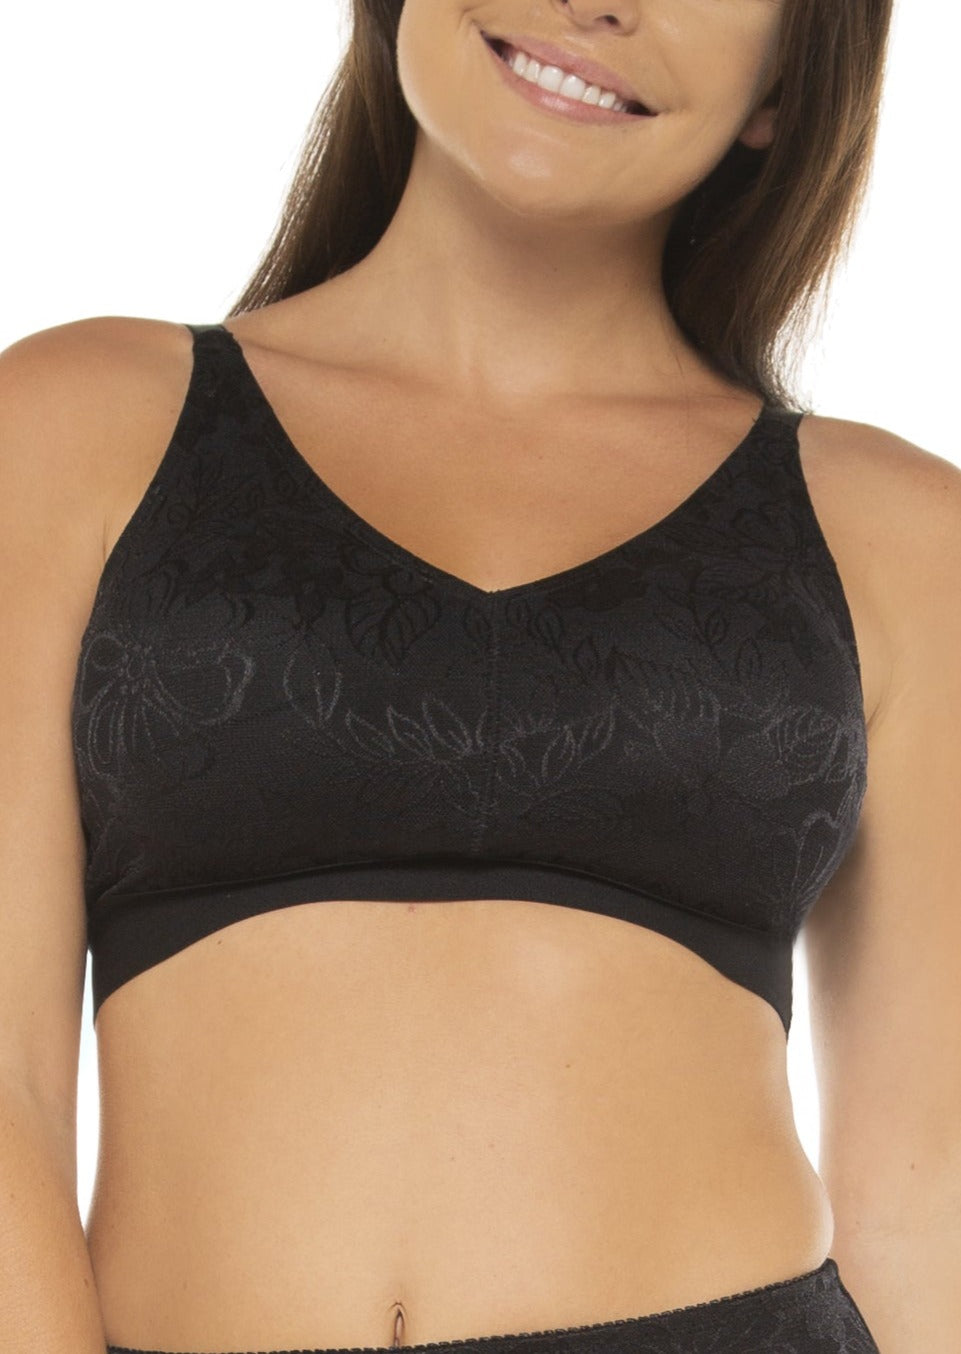 Wholesale Indian Bra Sizes Cotton, Lace, Seamless, Shaping 